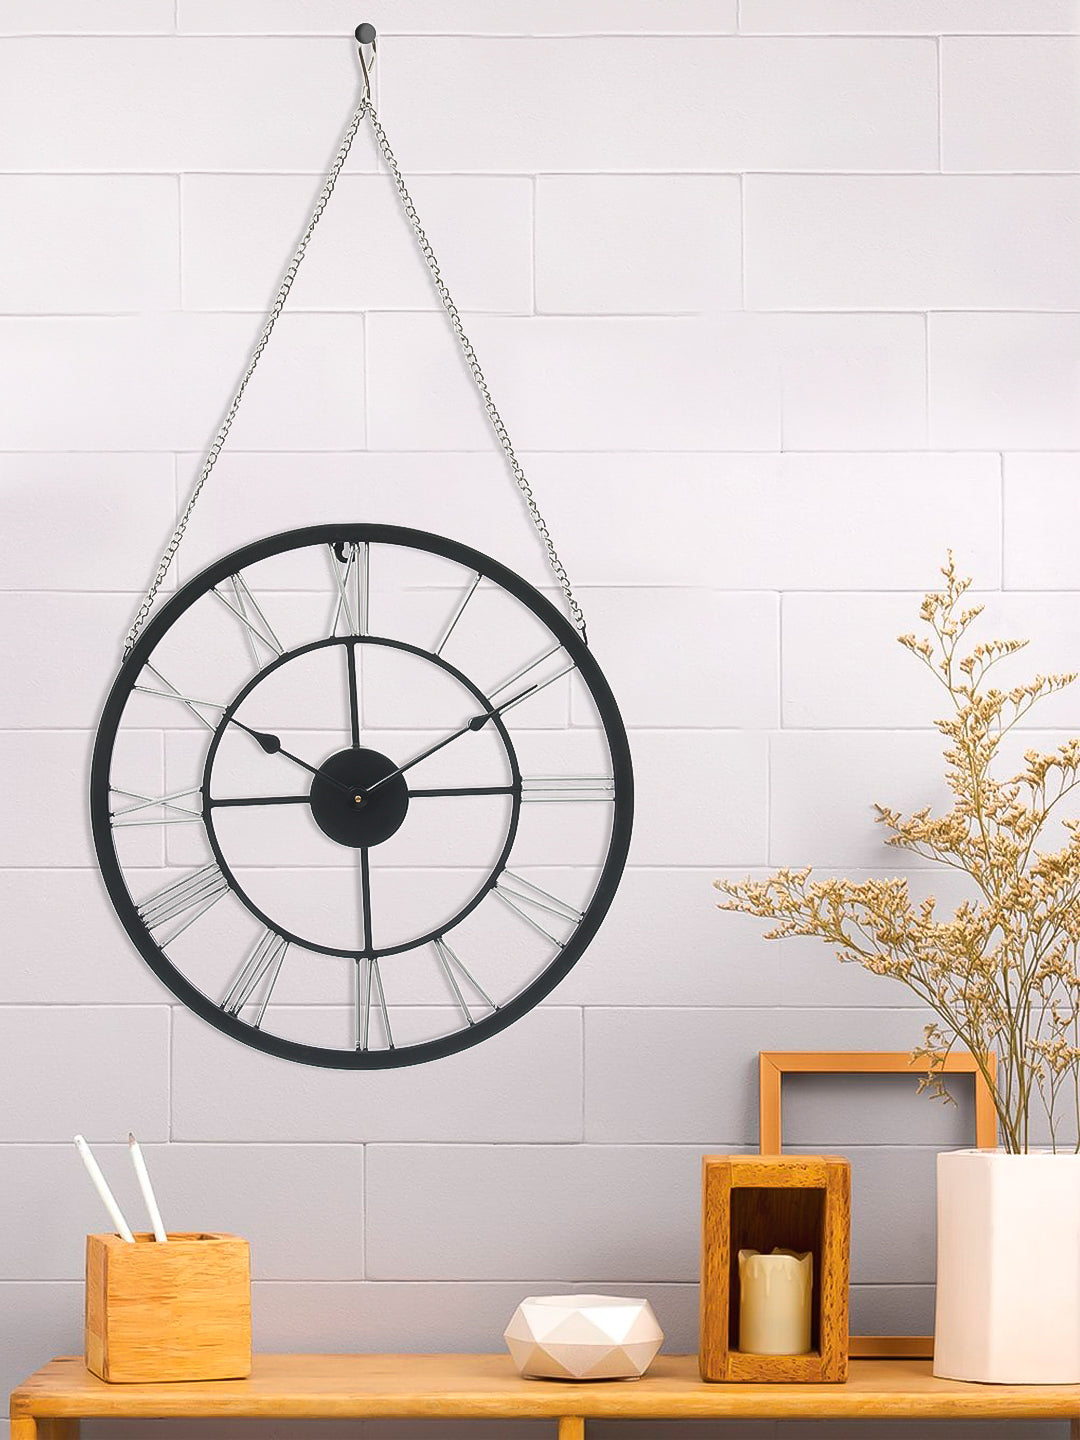 Round Black Iron Roman Numeral Handcrafted Analog Wall Clock With Hanging Chain 1